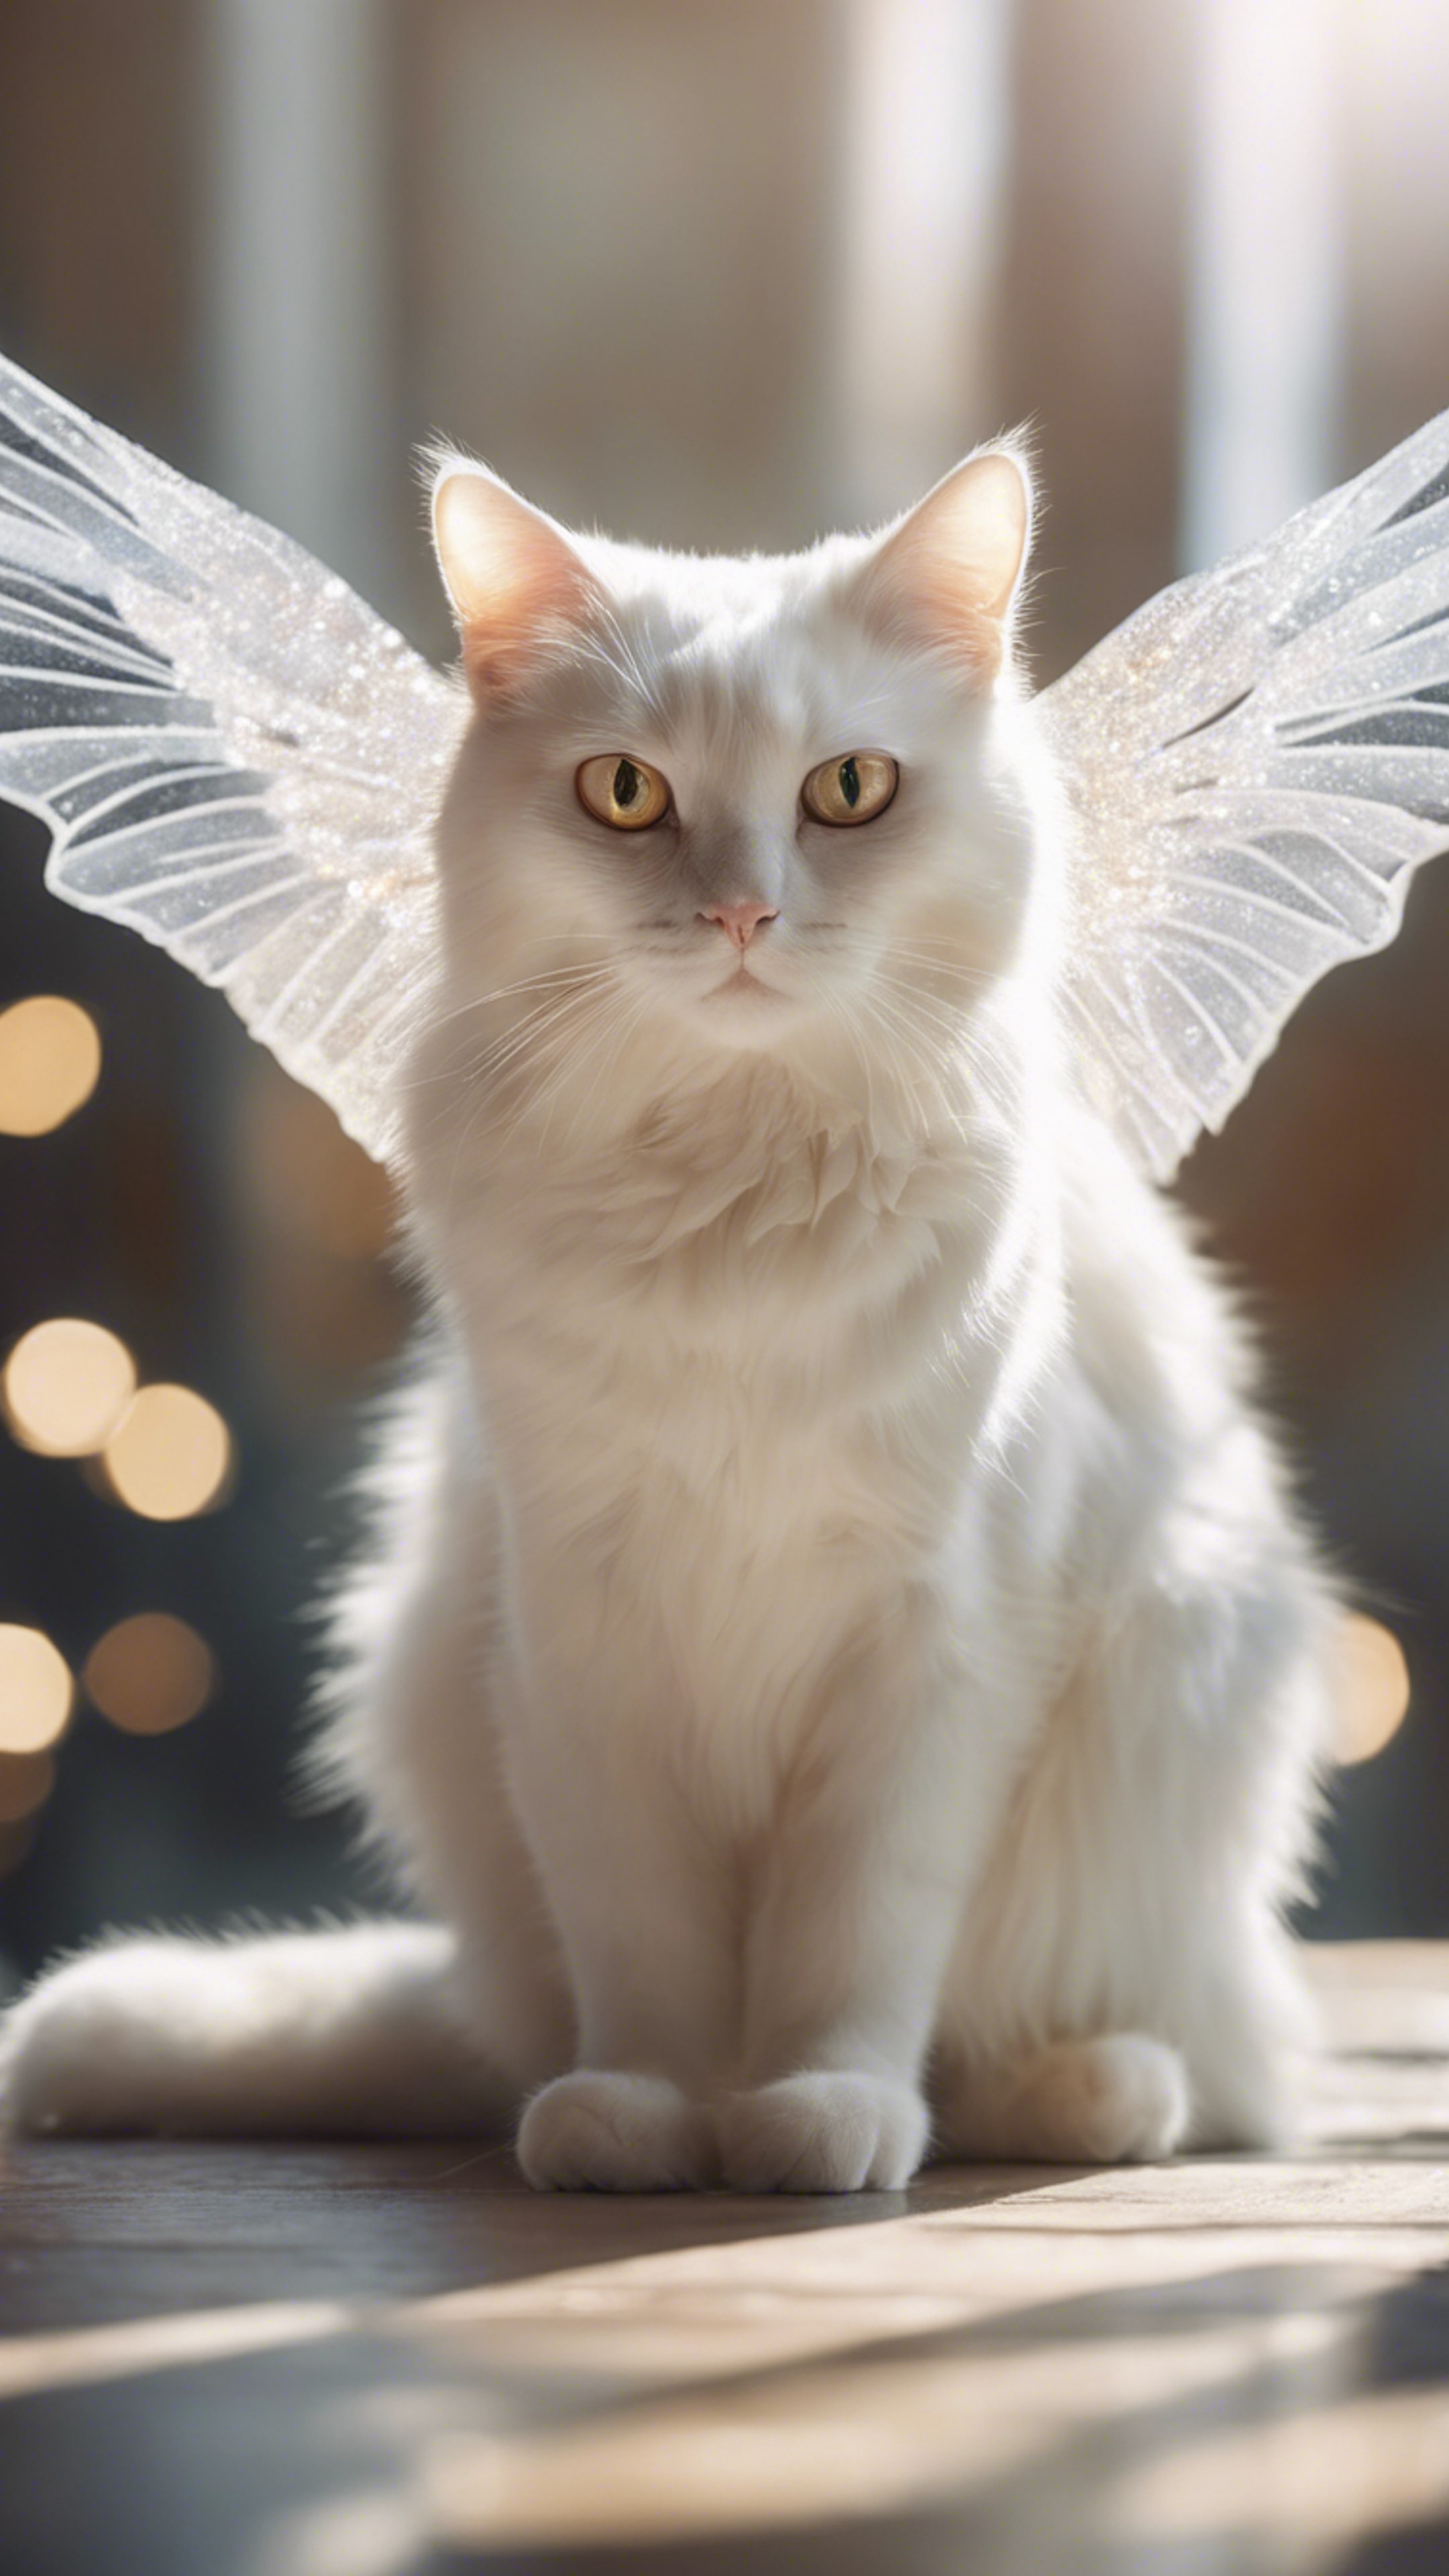 An angelic white cat with shimmering wings of radiant light. Hintergrund[3c11d42234a34aa69153]